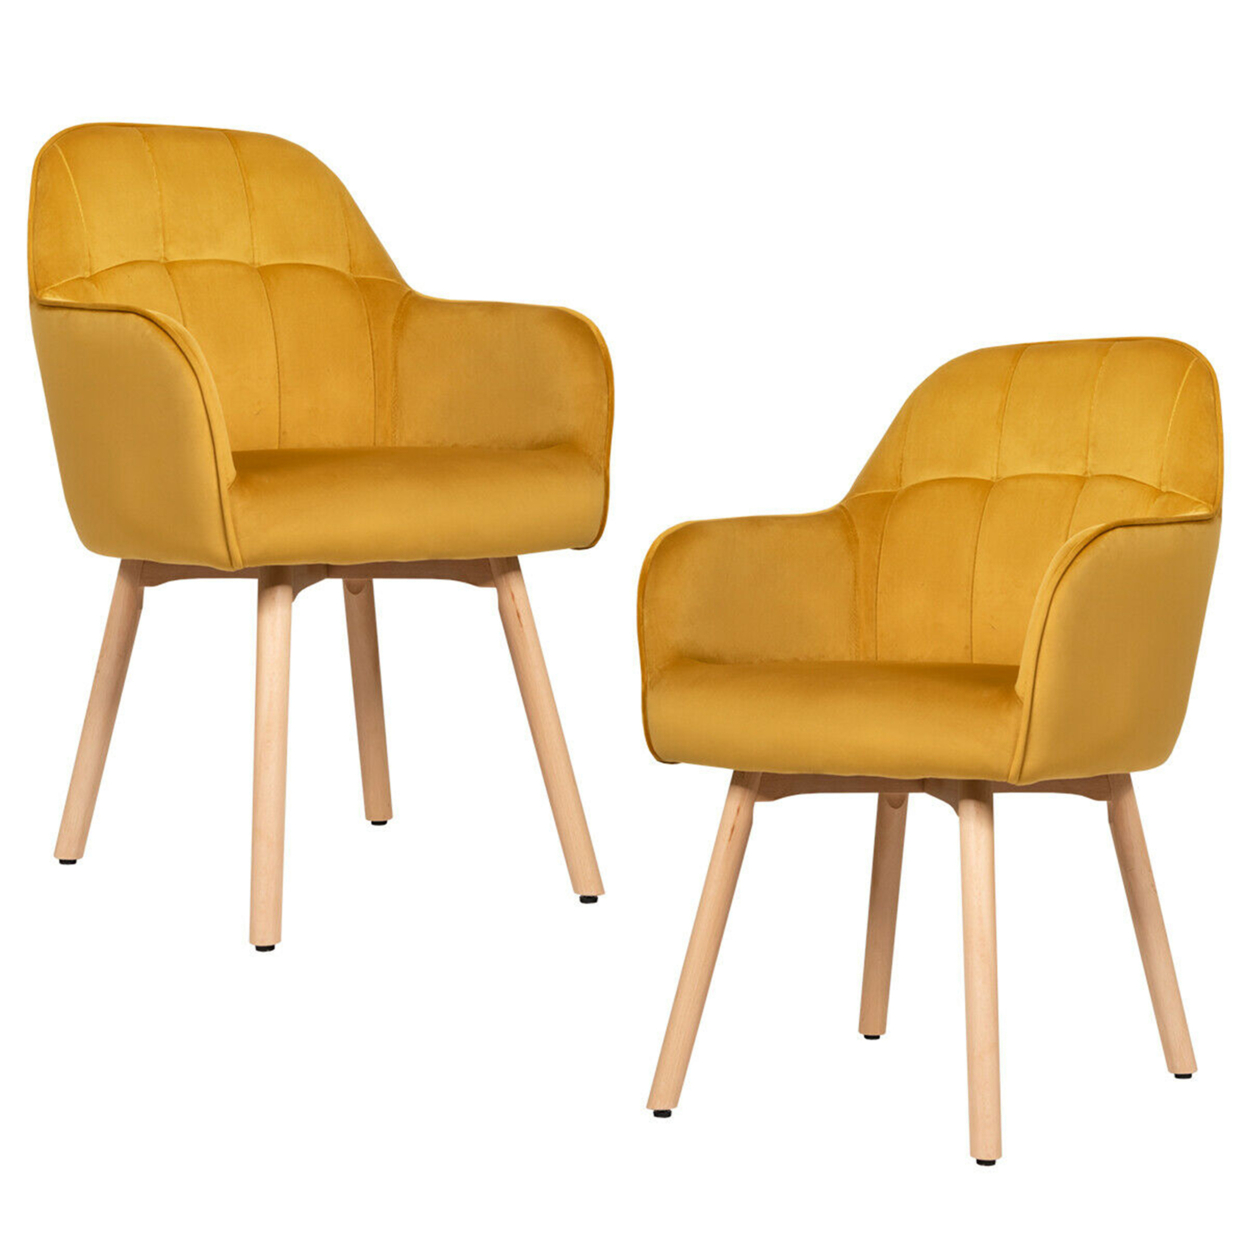 2PCS Modern Accent Armchair Upholstered Leisure Chair W/ Wooden Legs Yellow